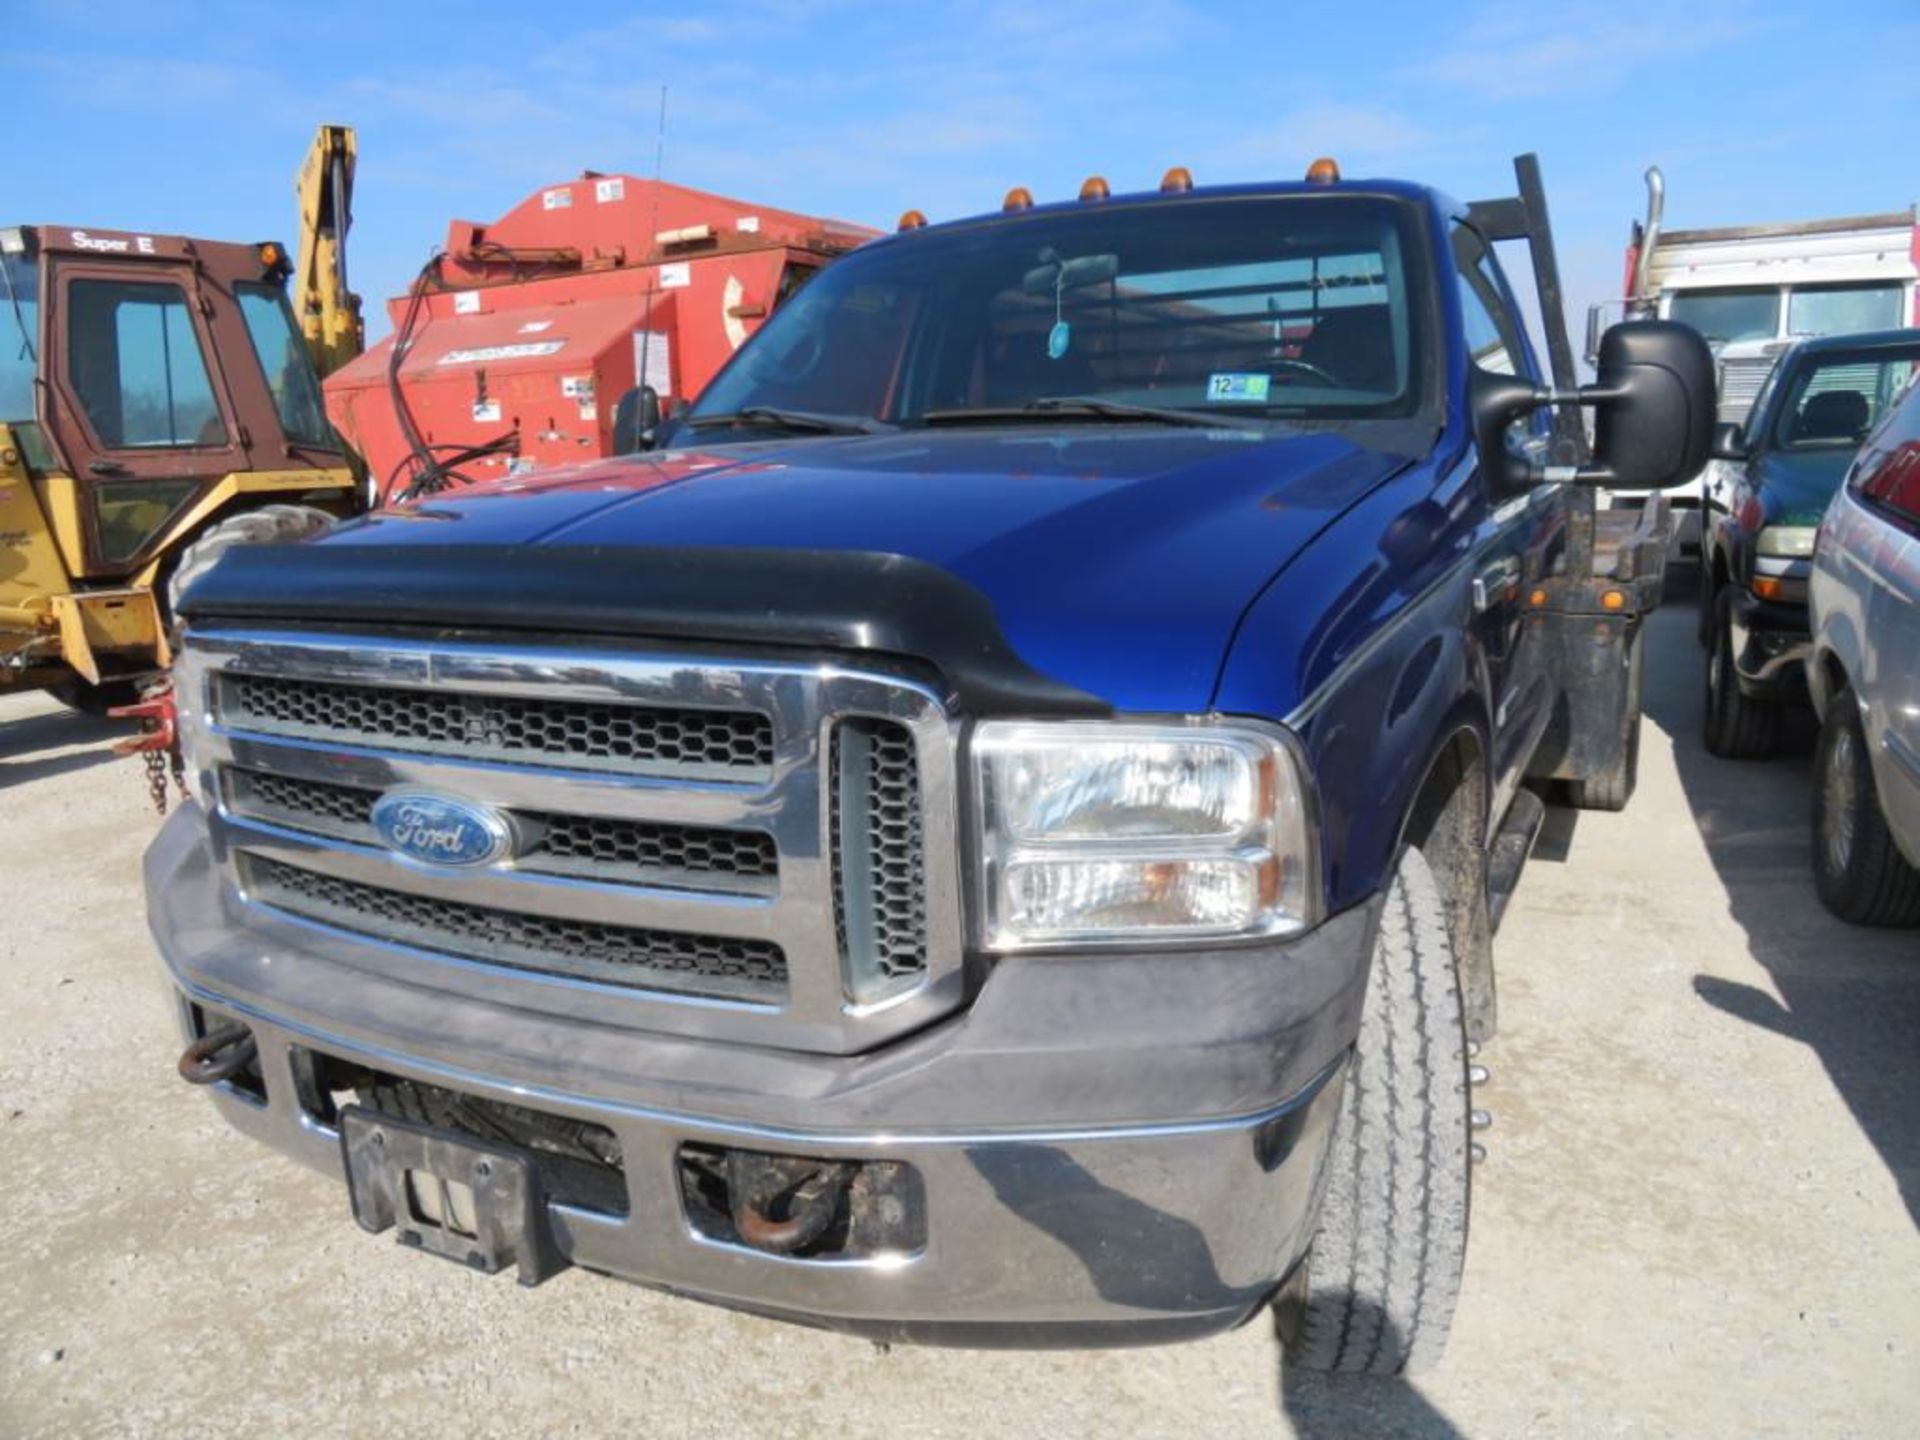 2000 F350 Reg Cab Dually Flatbed (title) 4x4, 6sp 260,100 miles, 7.3 Diesel New Transmission - Image 2 of 9